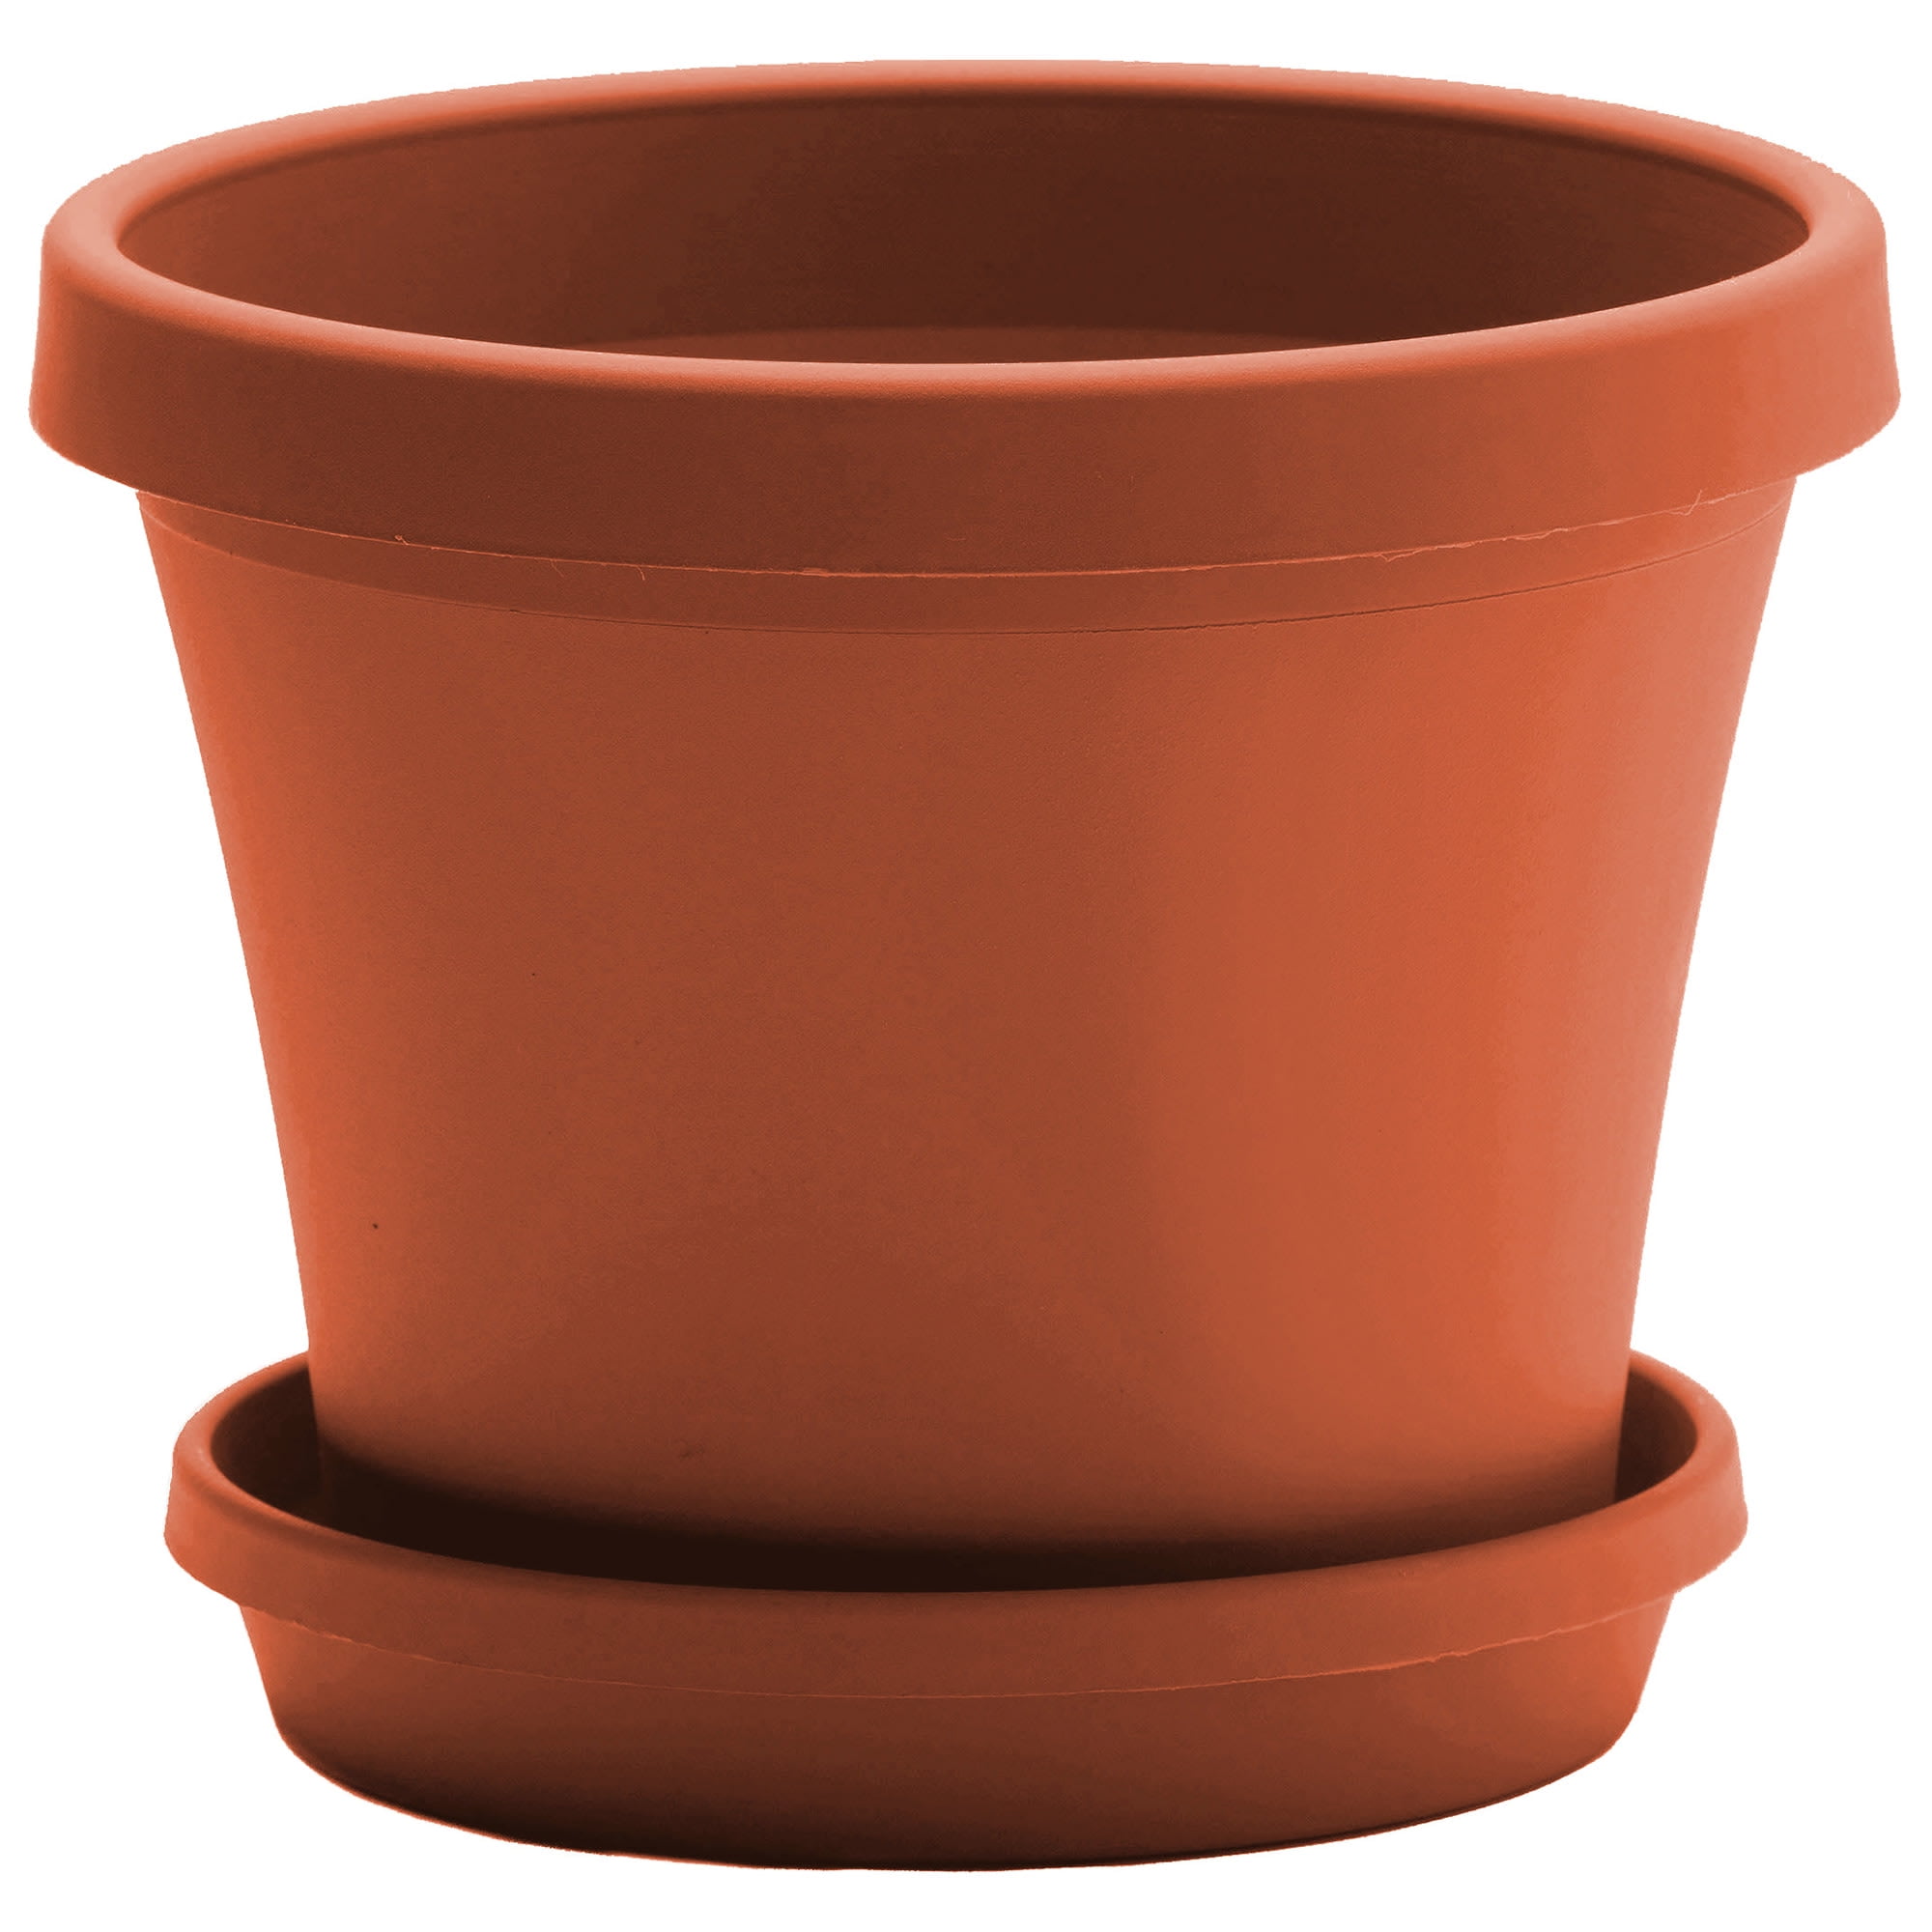 Dom ondersteuning ijsje Bloem Terra Pot Round Planter: 24" - Terra Cotta - Matte Finish, Durable  Resin, Traditional Style Pot, For Indoor and Outdoor Use, Gardening, 16  Gallon Capacity, Saucer Not Included - Walmart.com